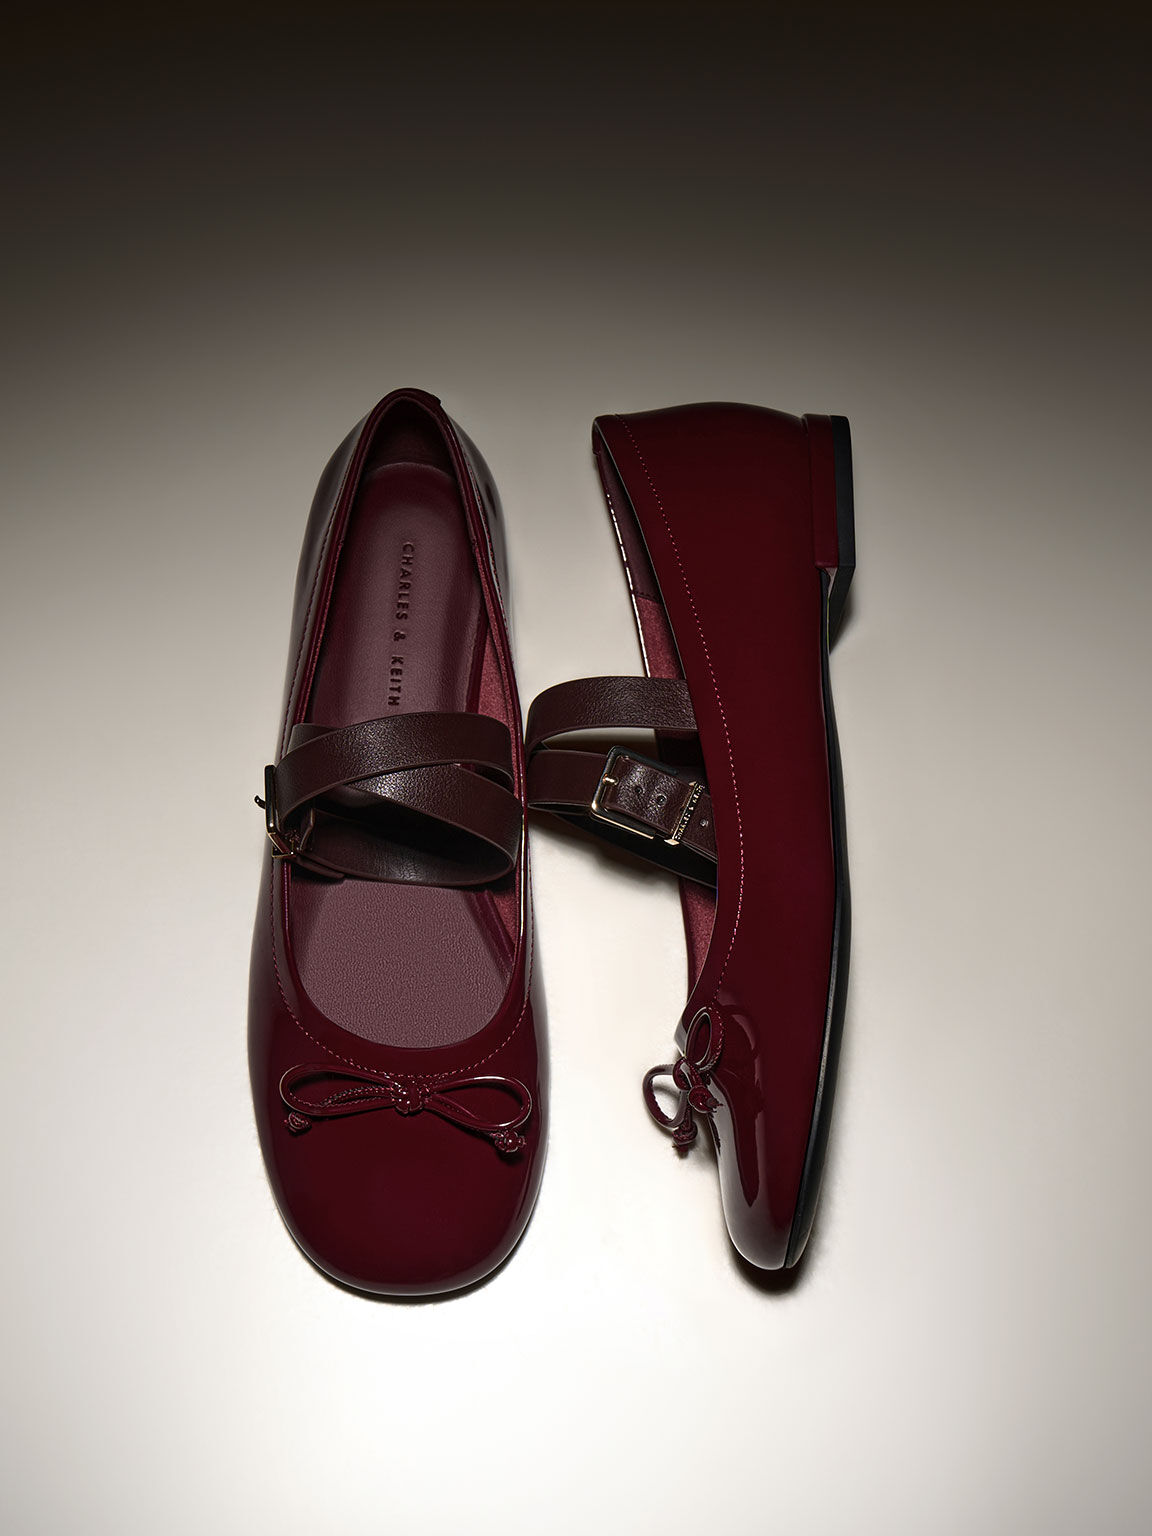 Women’s Margot patent crossover-strap ballerinas in maroon - CHARLES & KEITH